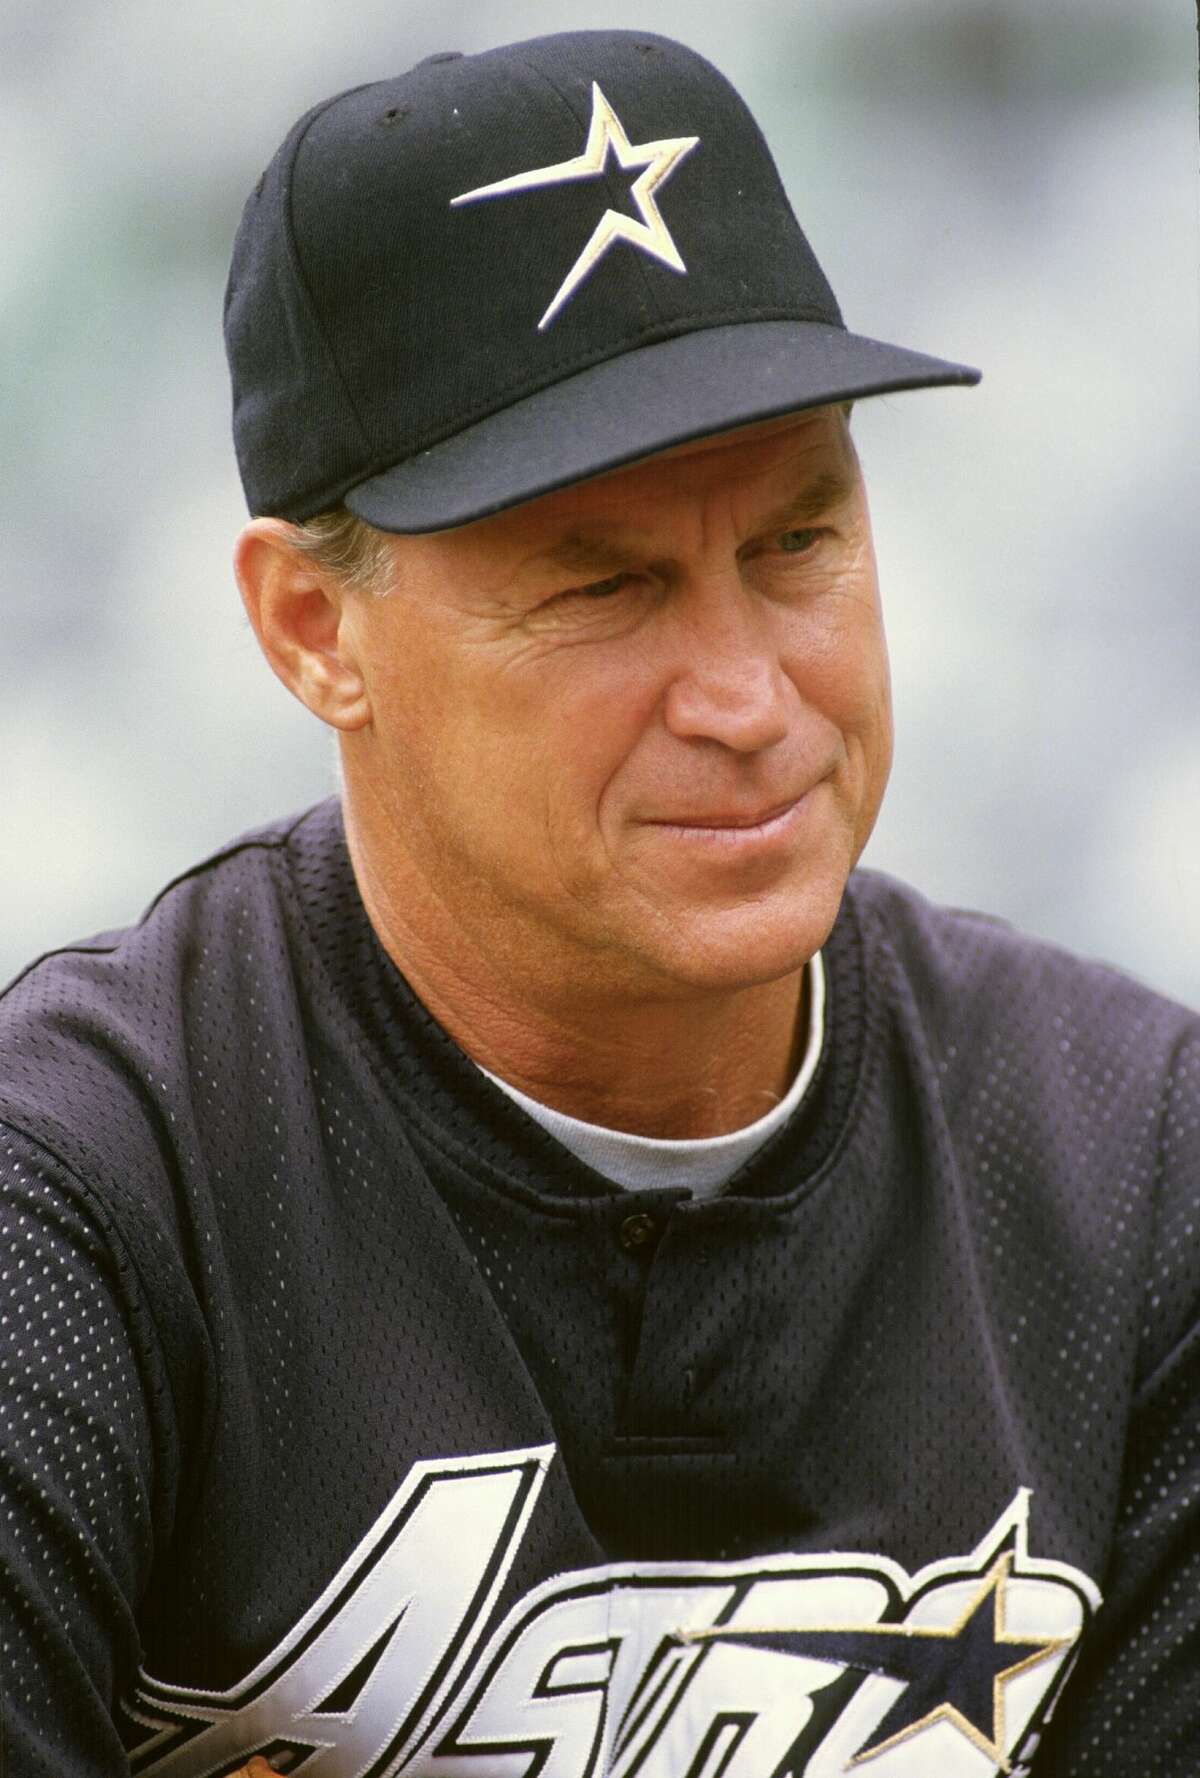 UNSPECIFIED - CIRCA 1994: Pitching coach Mel Stottlemyre #30 of the Houston Astros looks on during an Major League Baseball game circa 1994. Stottlemyre coached with the Astros from 1994-95. (Photo by Focus on Sport/Getty Images)